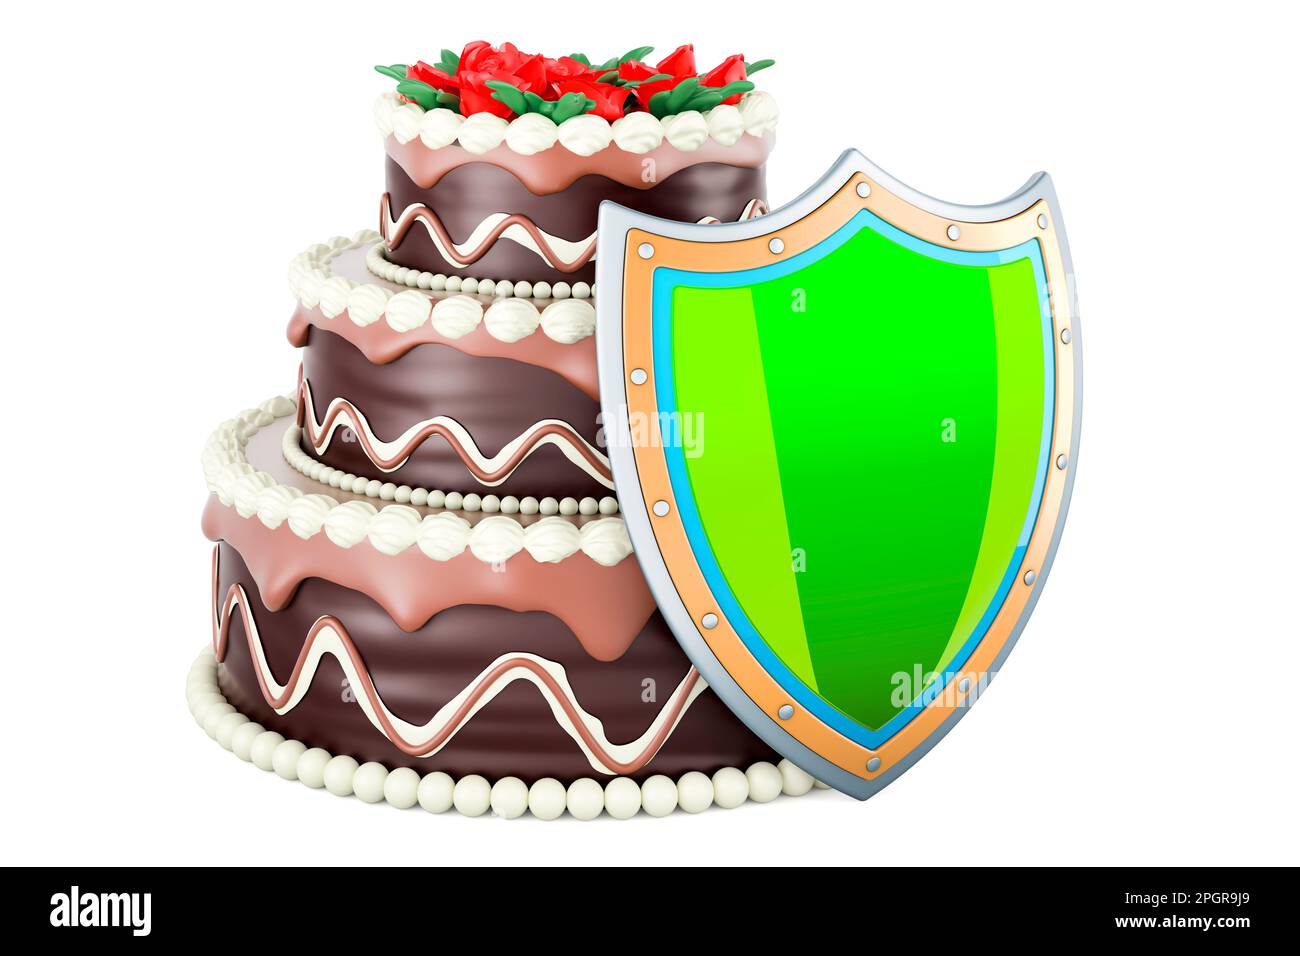 Chocolate Cake with shield. 3D rendering isolated on white background Stock Photo